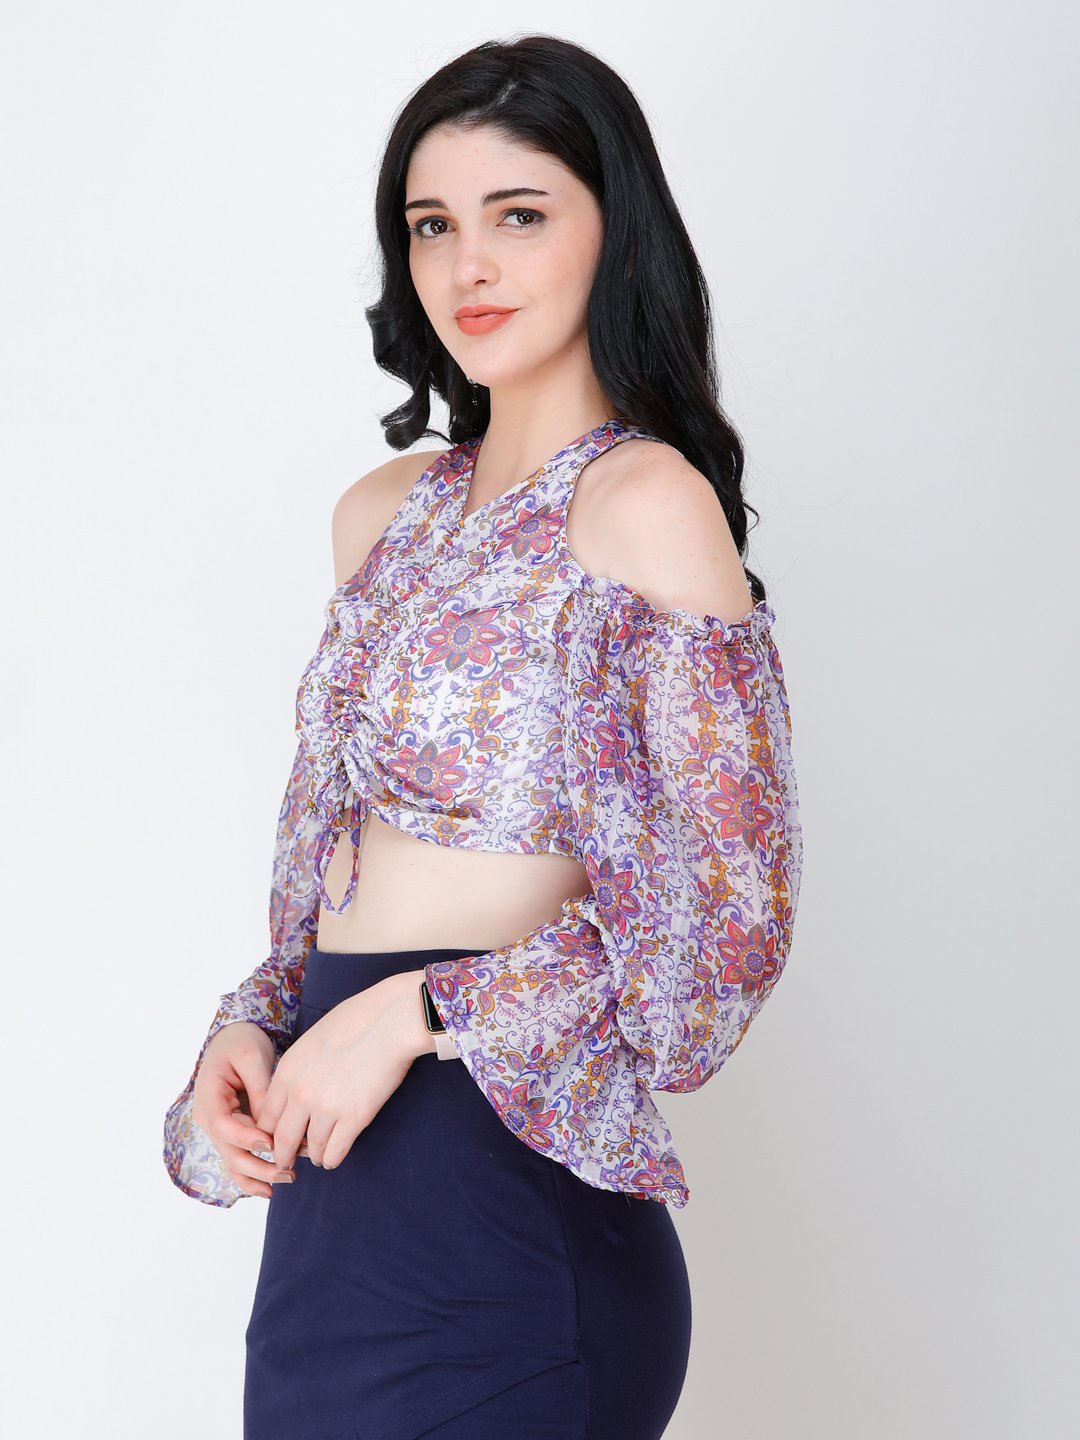 SCORPIUS printed floral styled front crop top